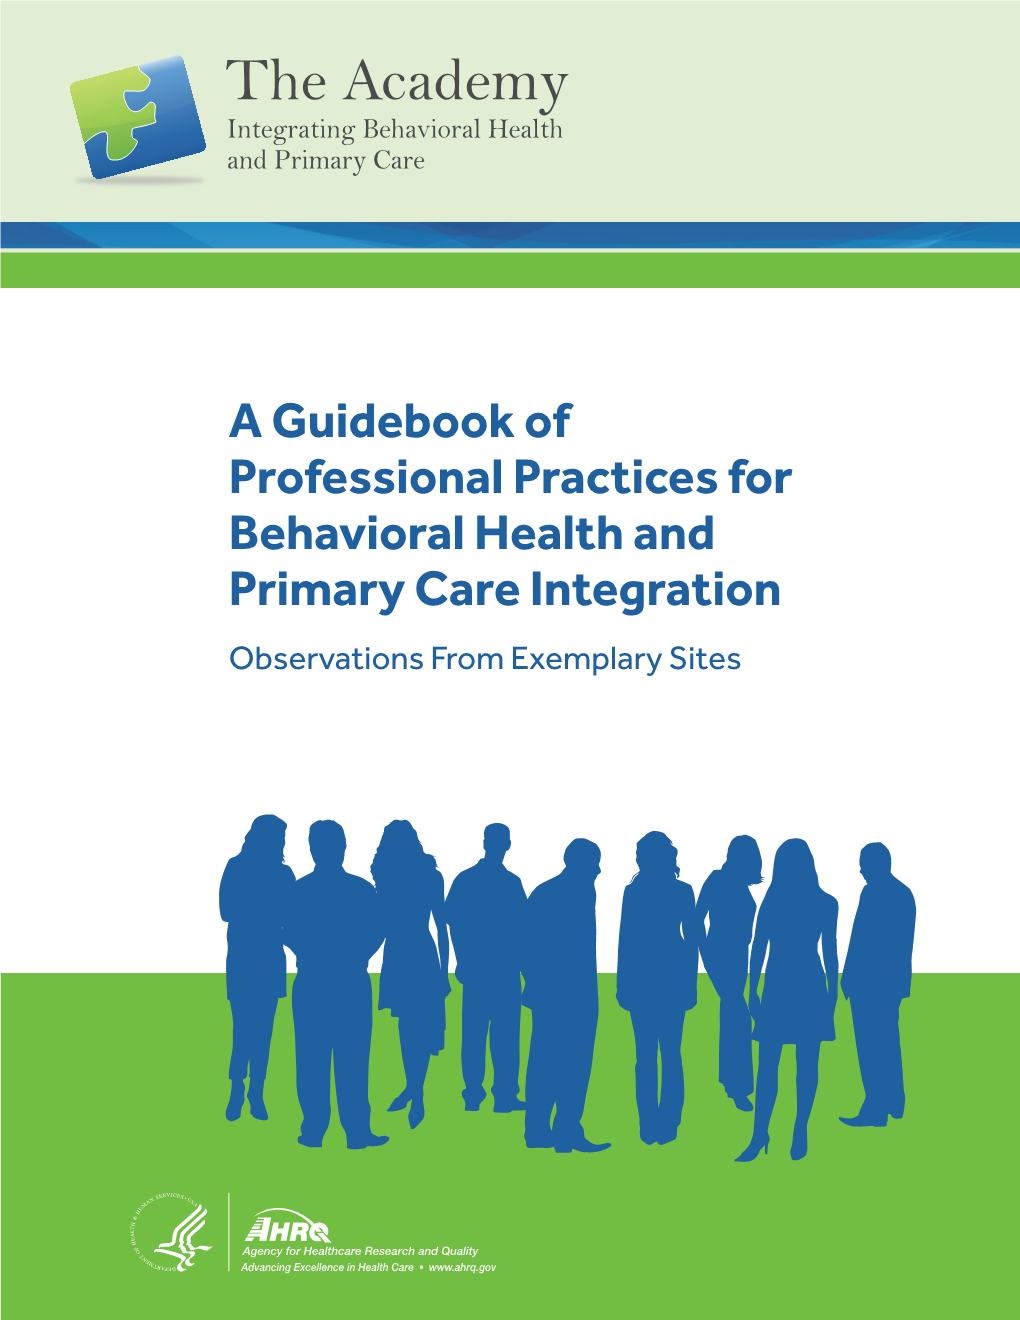 A Guidebook of Professional Practices for Behavioral Health and Primary